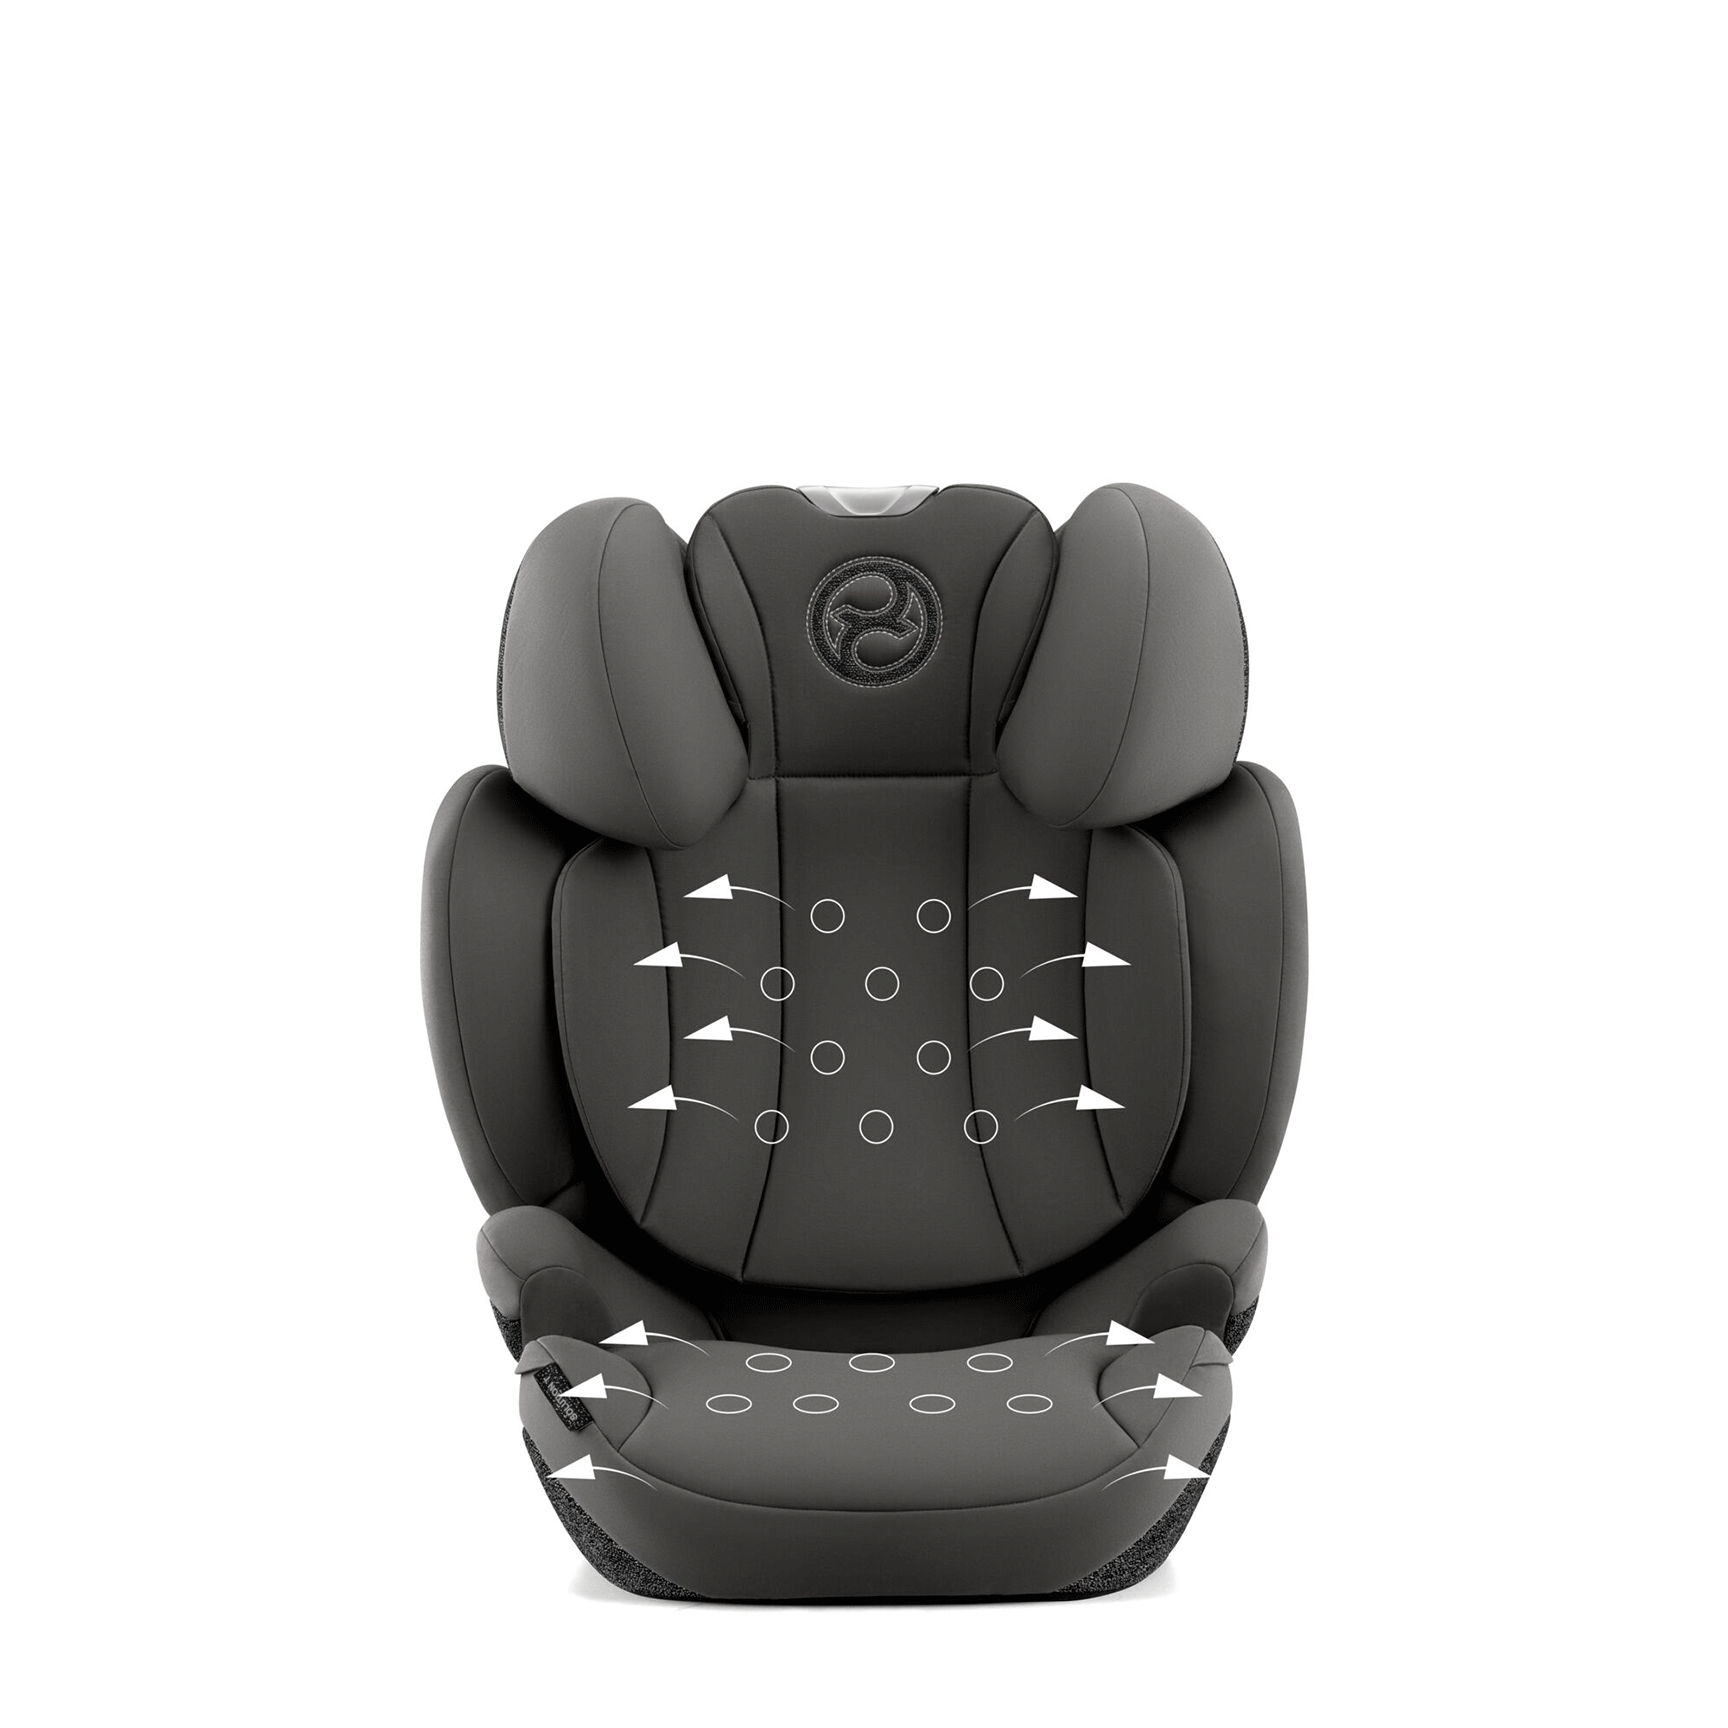 Cybex Solution T i-Fix in Mirage Grey Highback Booster Seats 522004120 4063846380596